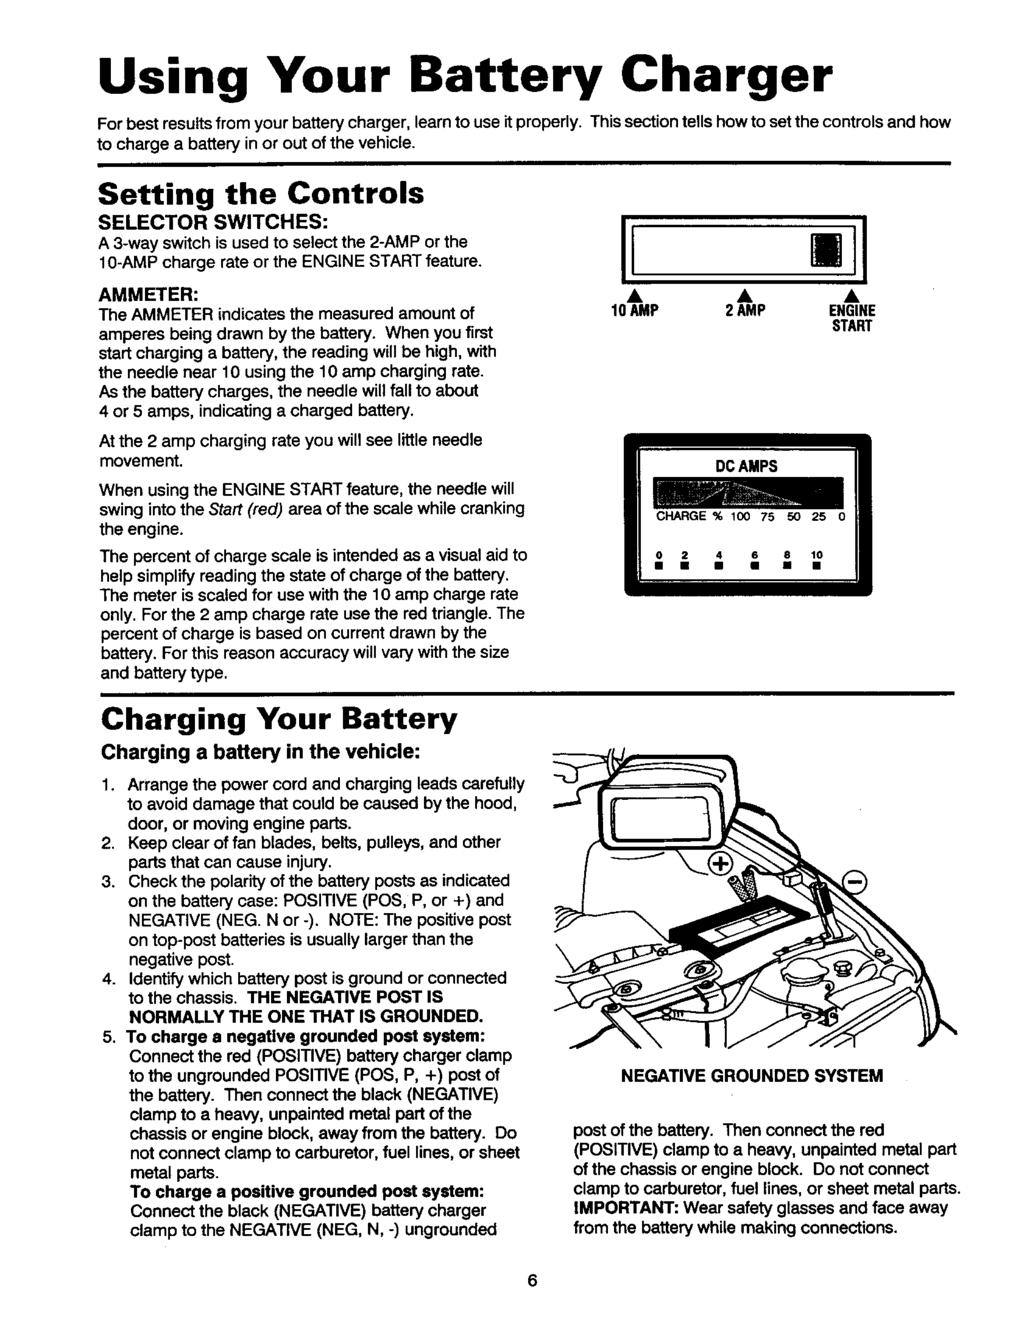 Using Your Battery Charger For best results from your battery charger, learn to use it properly. This section tells how to set the controls and how to charge a battery in or out of the vehicle.